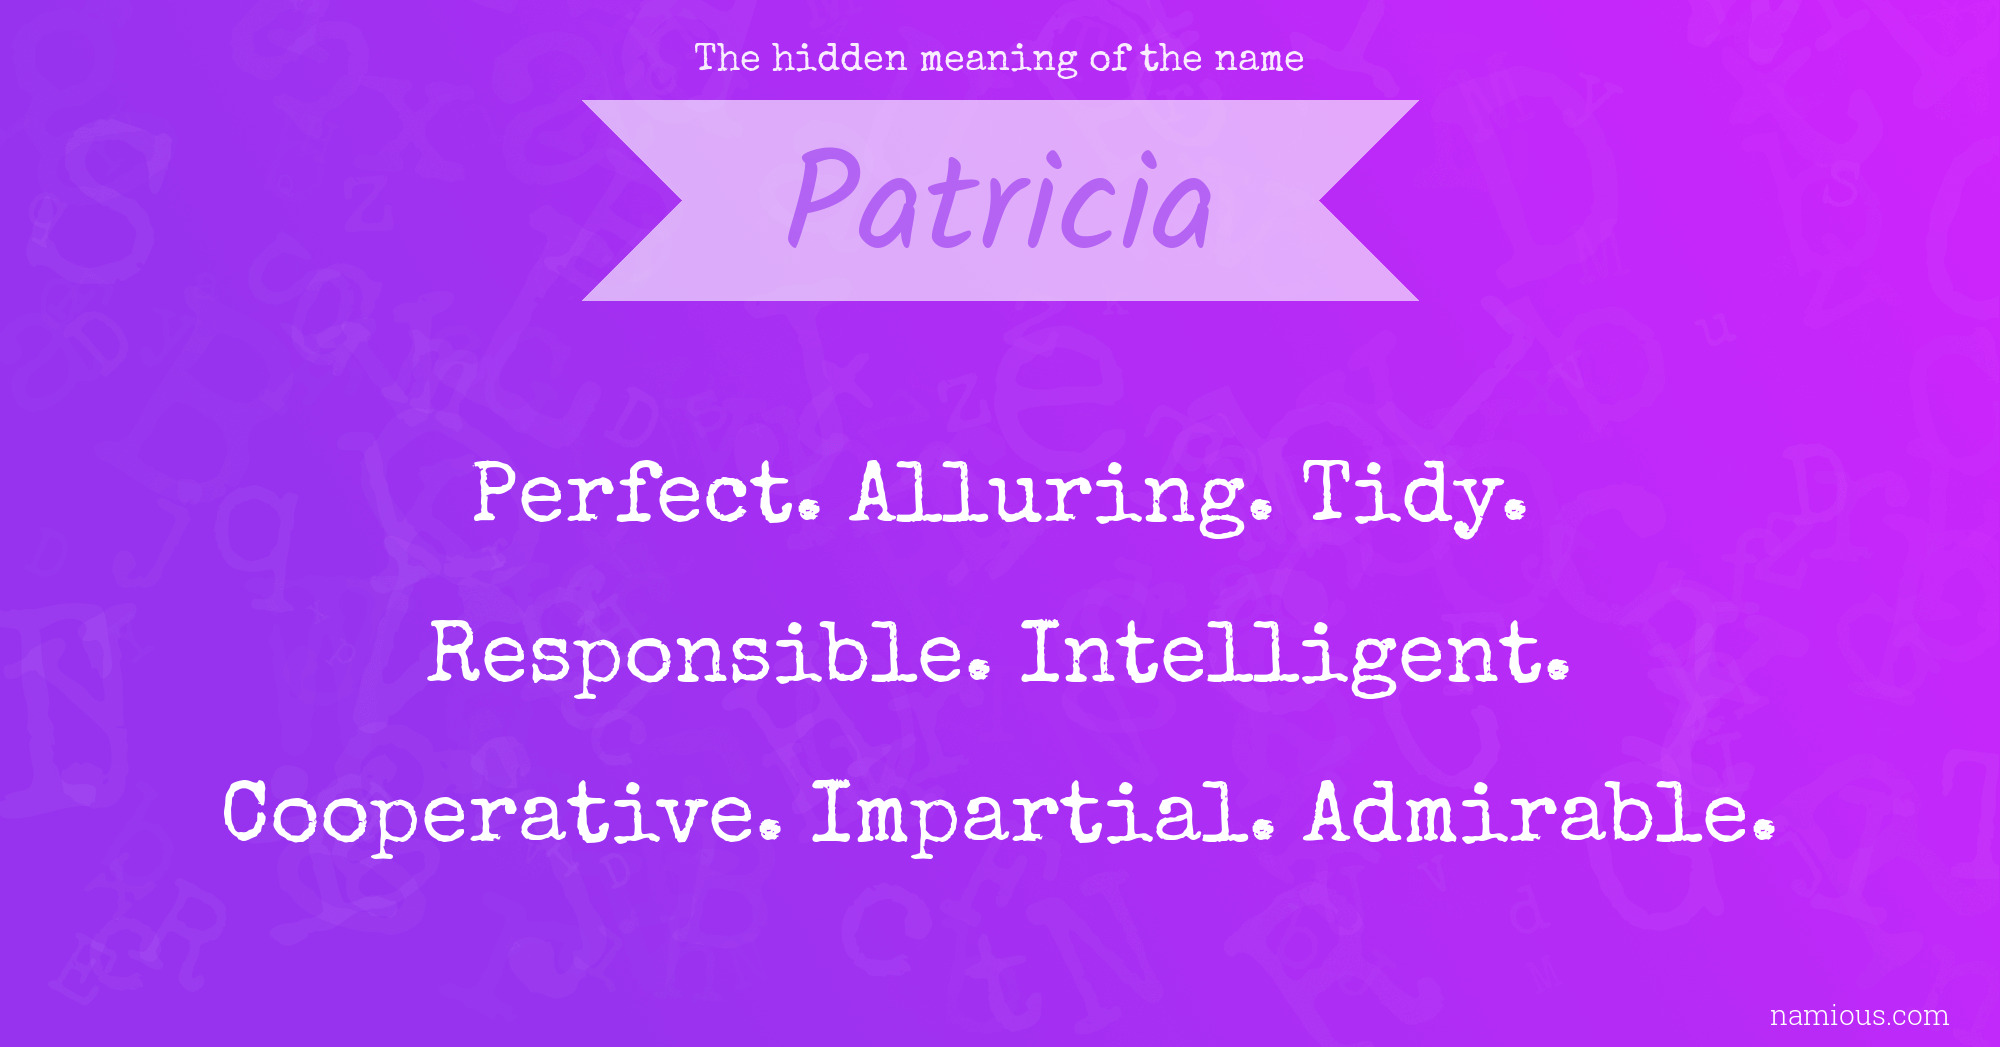 The hidden meaning of the name Patricia